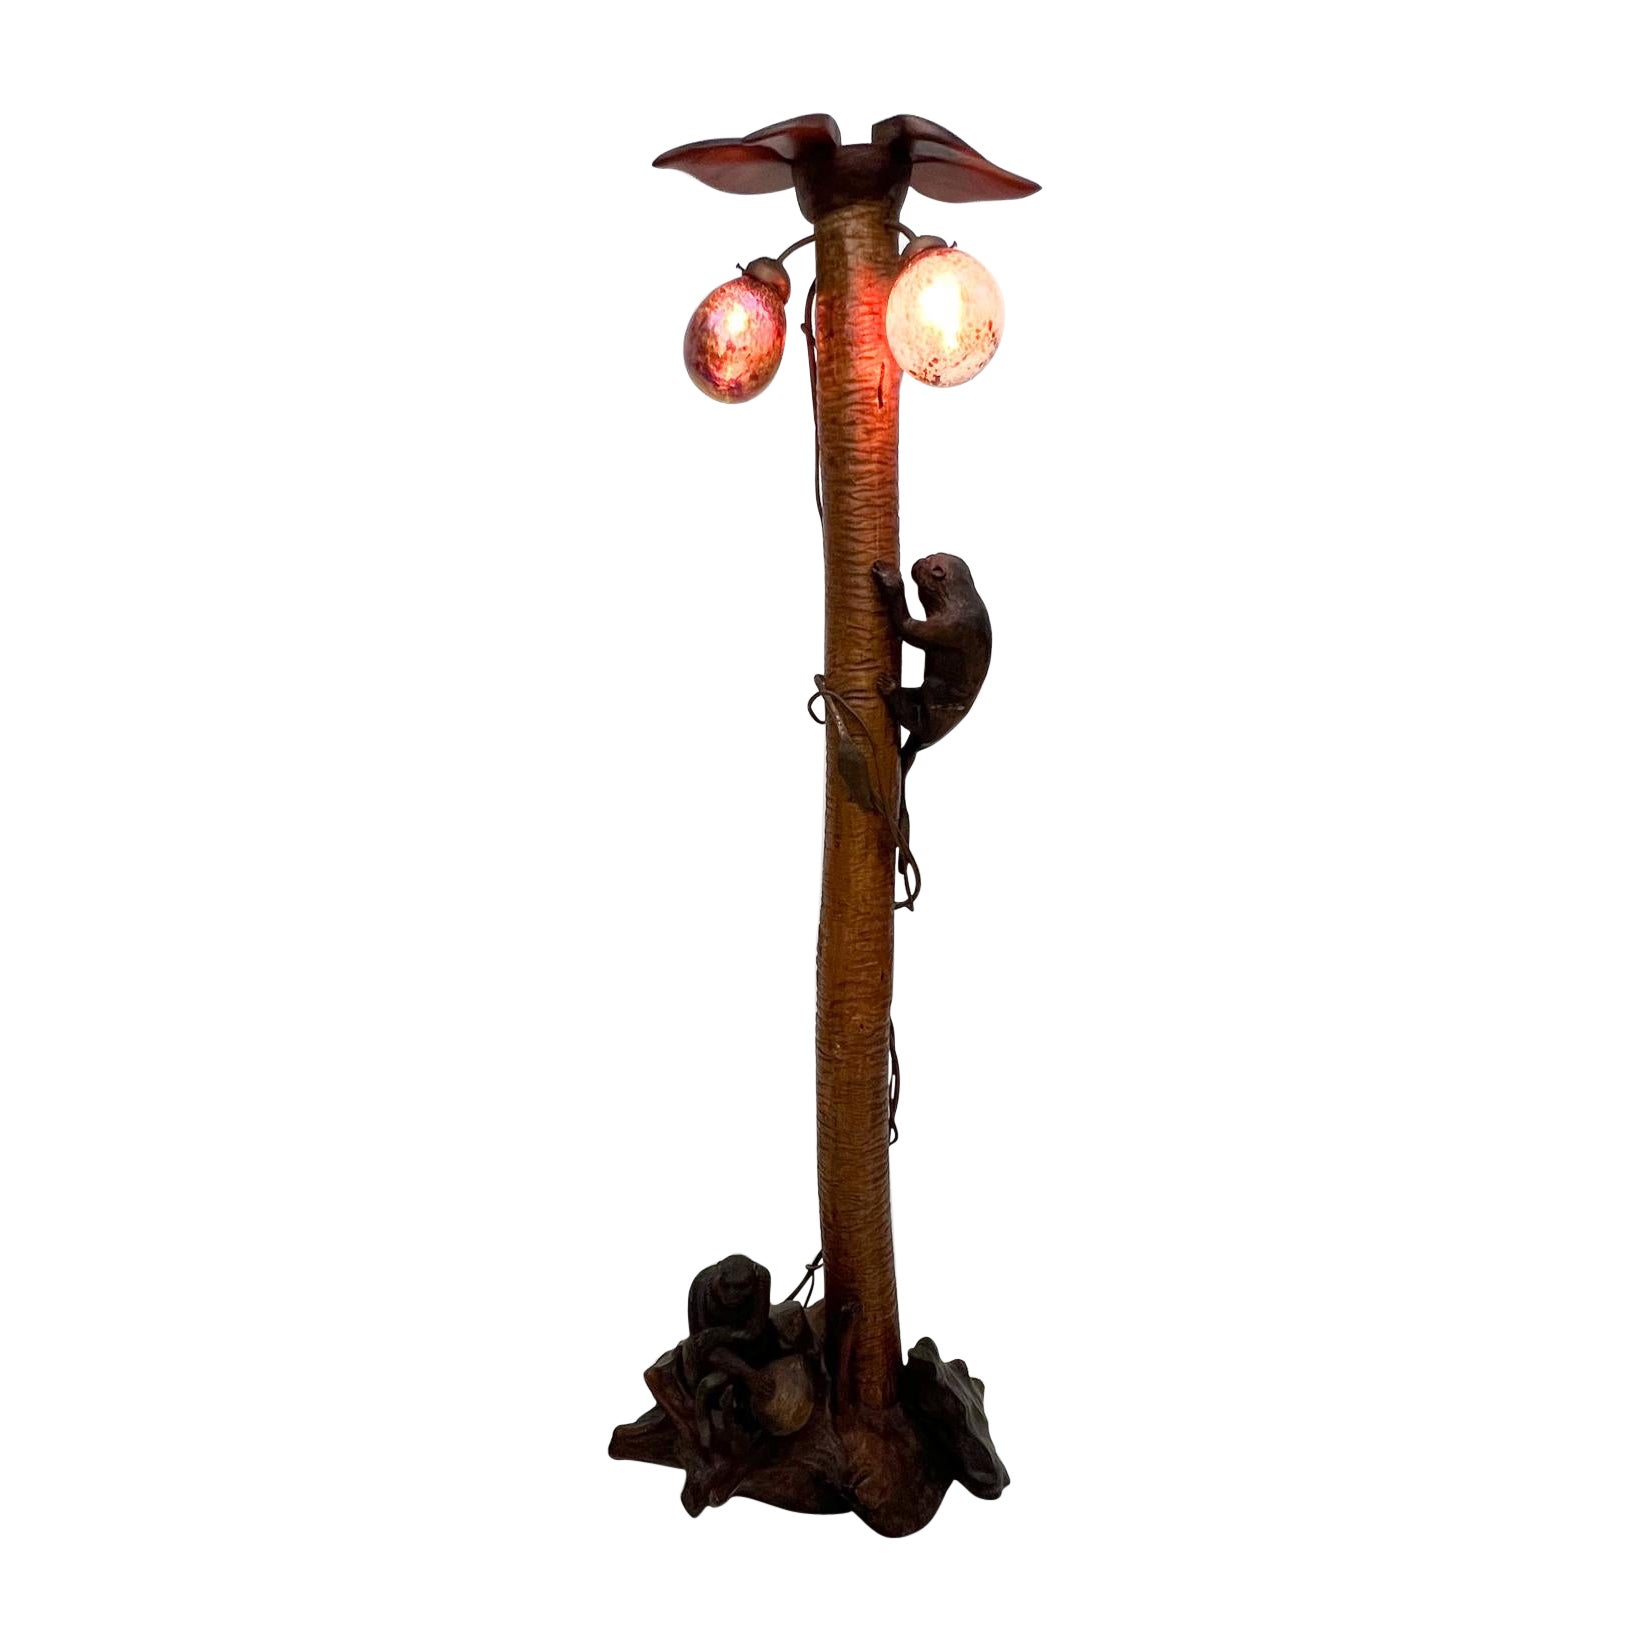 1984 John Barber exotic art glass floor lamp monkey ape tree natural habitat art
Copper metal solid hand carved wood art glass.
Handcrafted in the style of Mario Lopes Torres
Artist signed, difficult to read.
Measures: 74 tall x 25 wide x 19